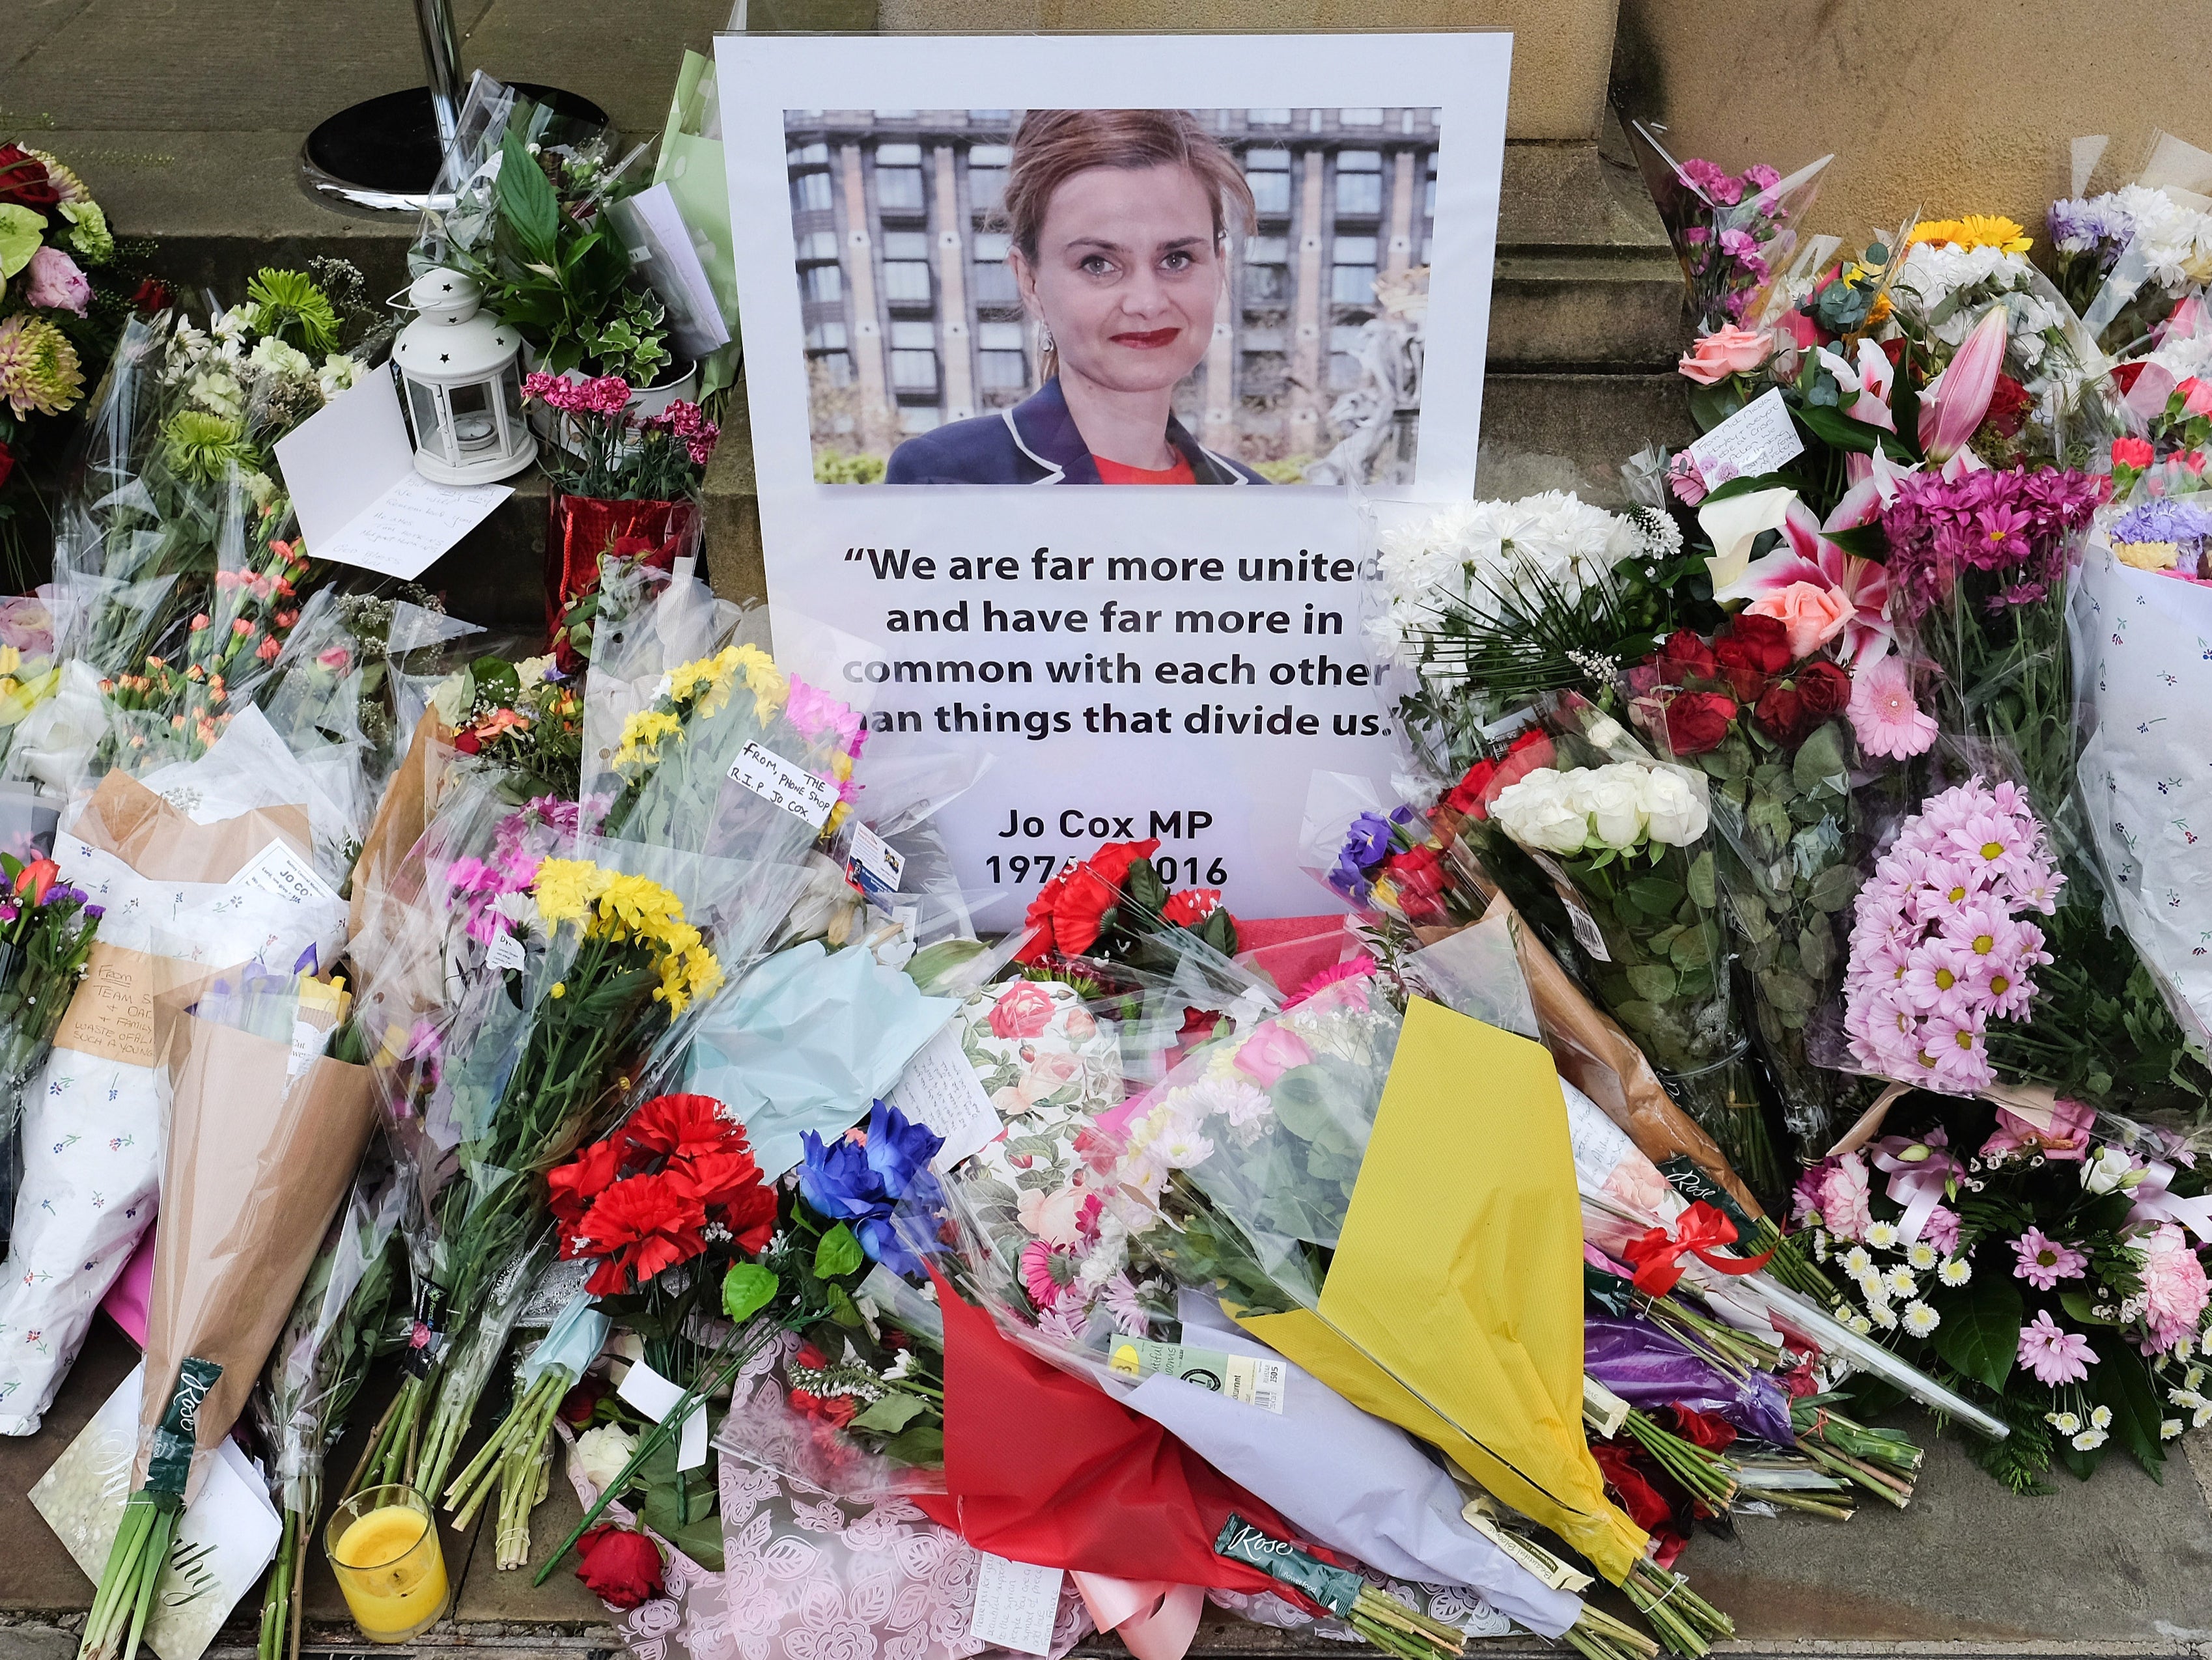 Jo Cox told parliament in her maiden speech that we have ‘more in common than things that divide us’